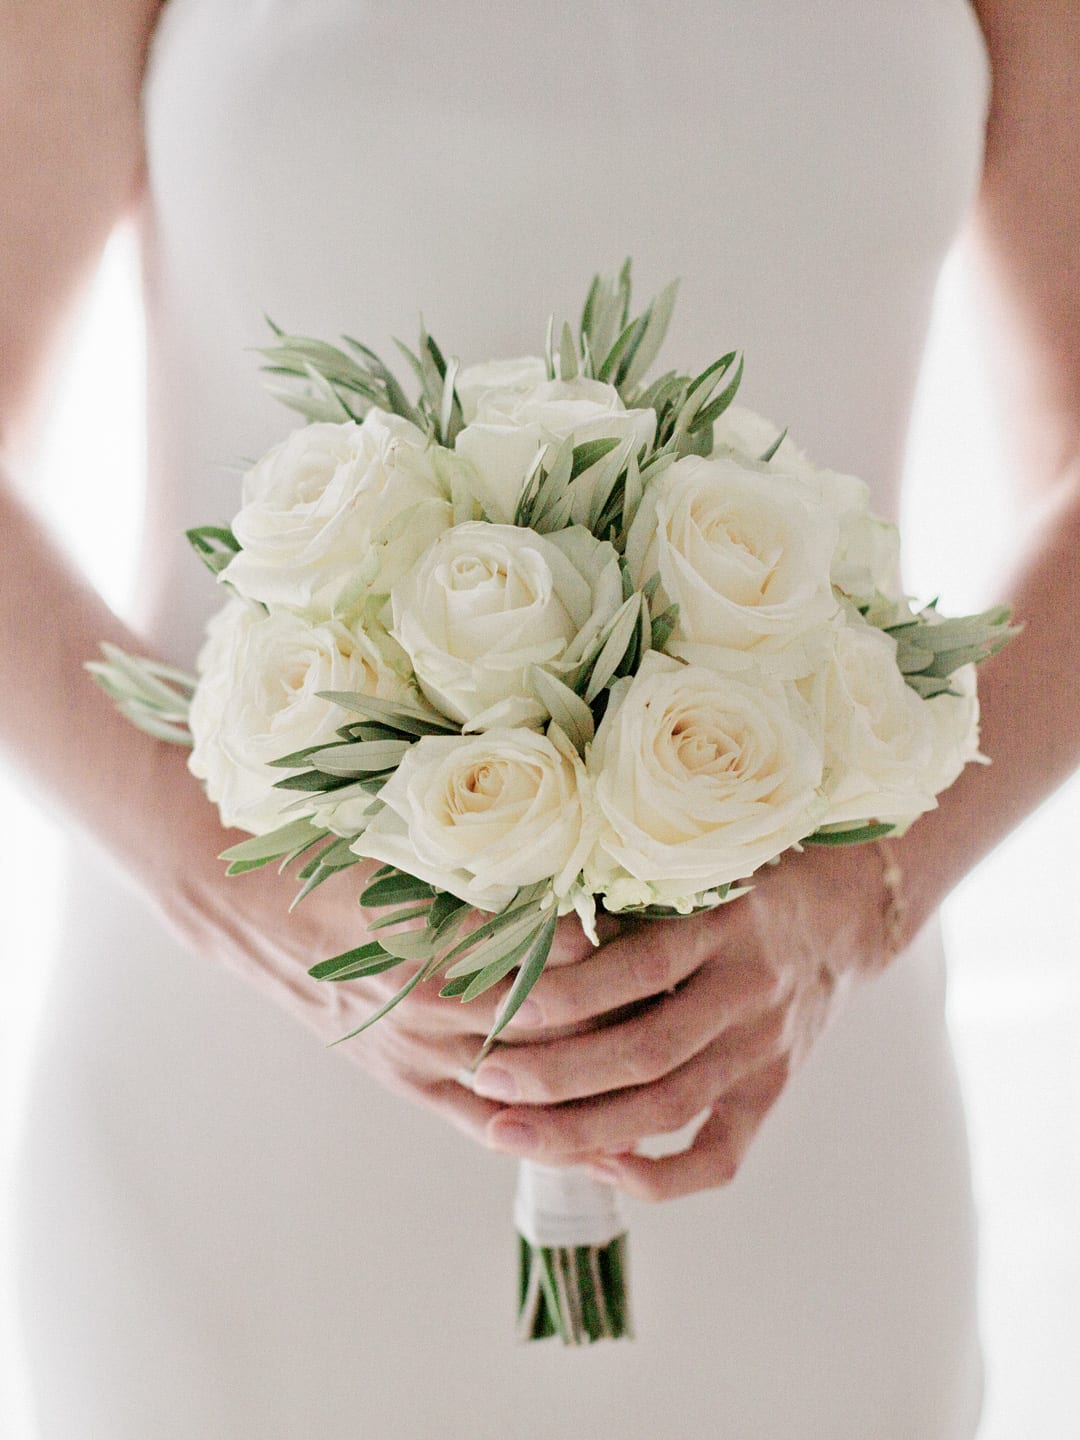 My wedding bouquet of cream roses and olive